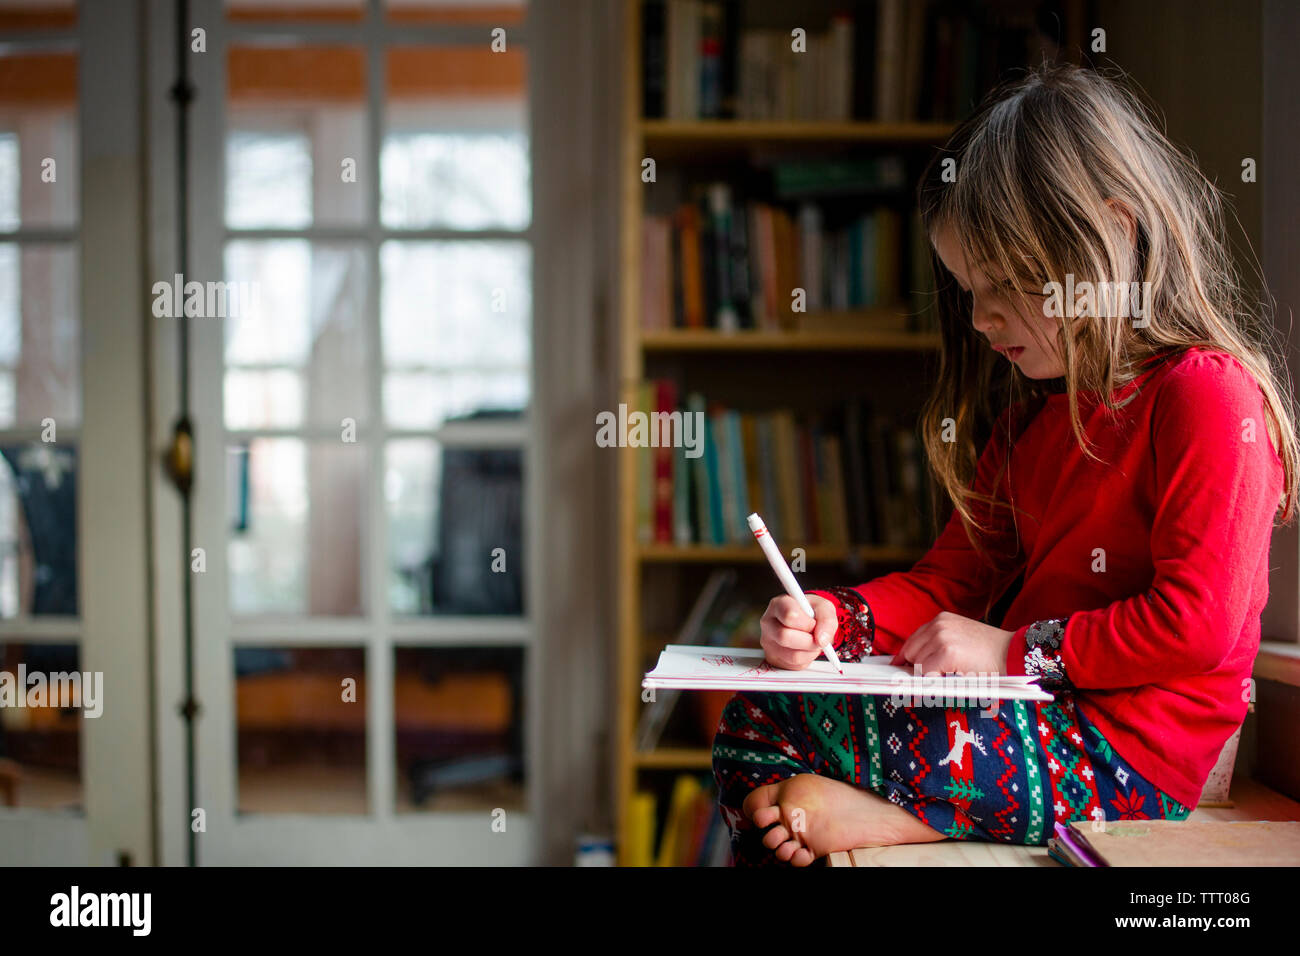 A little girl sitting barefoot by a bookshelf writing in a notebook Stock Photo